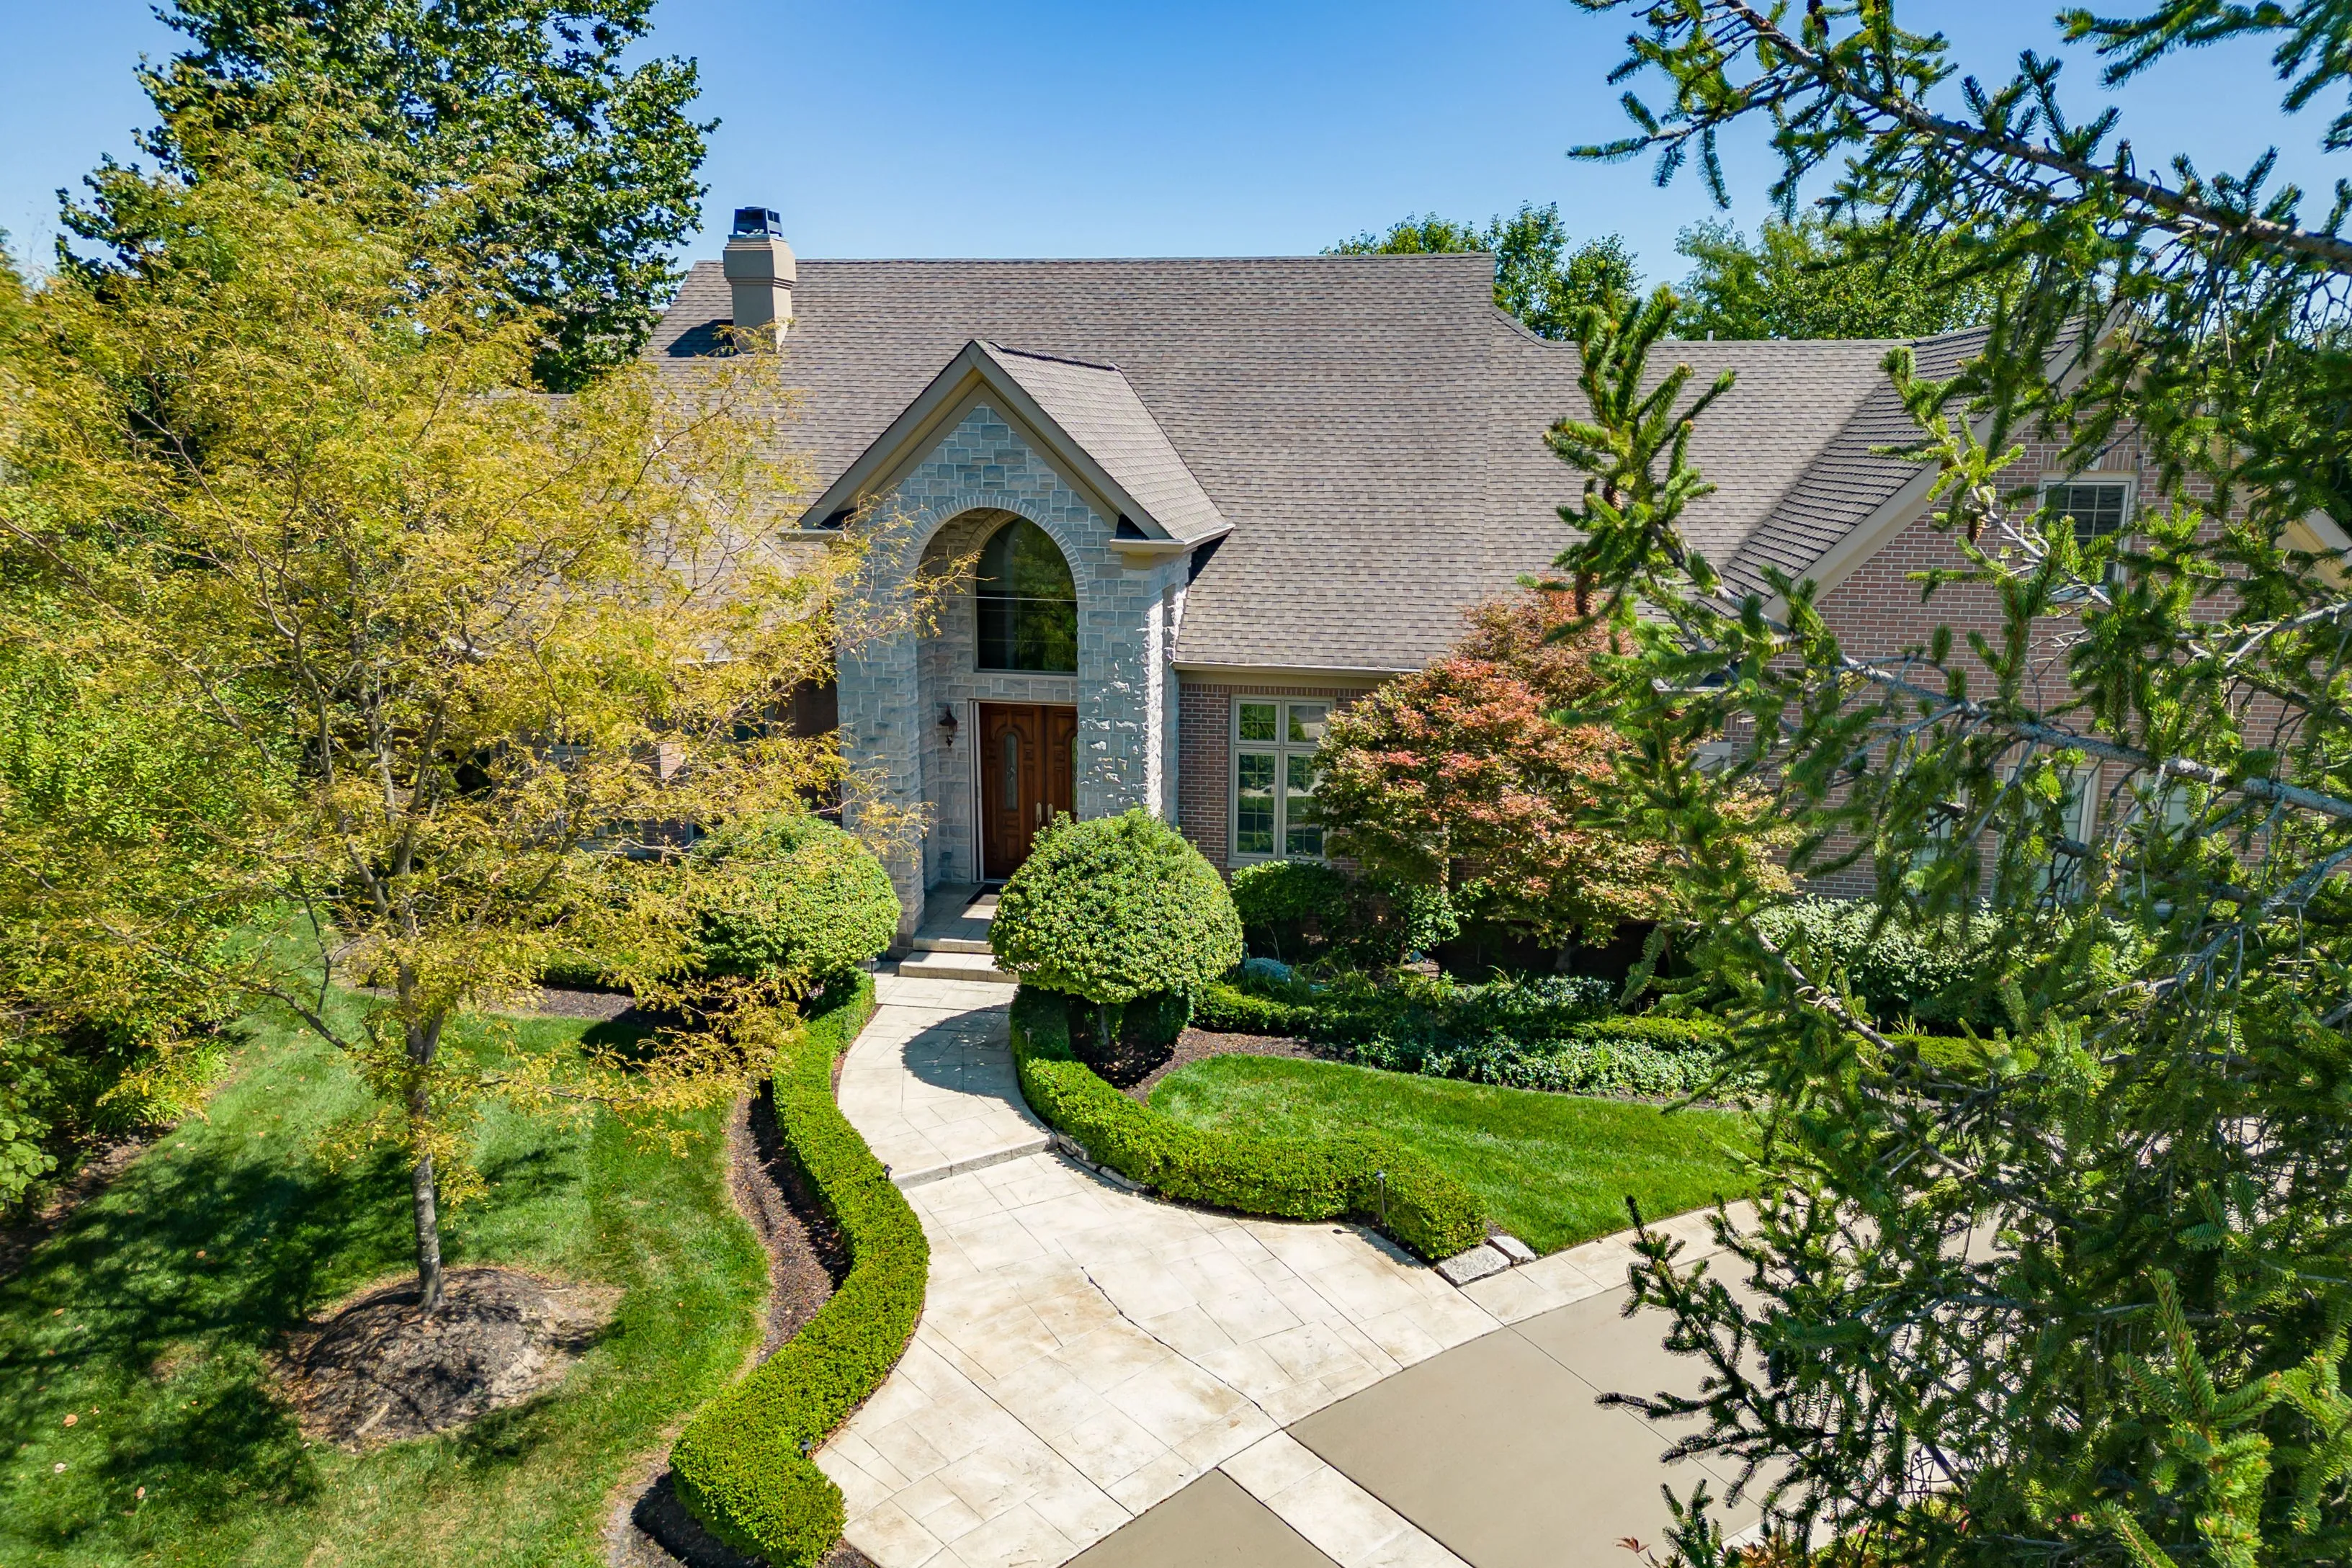 Two-story suburban house with a landscaped front yard and a stone pathway leading to an arched front entrance on a sunny day.